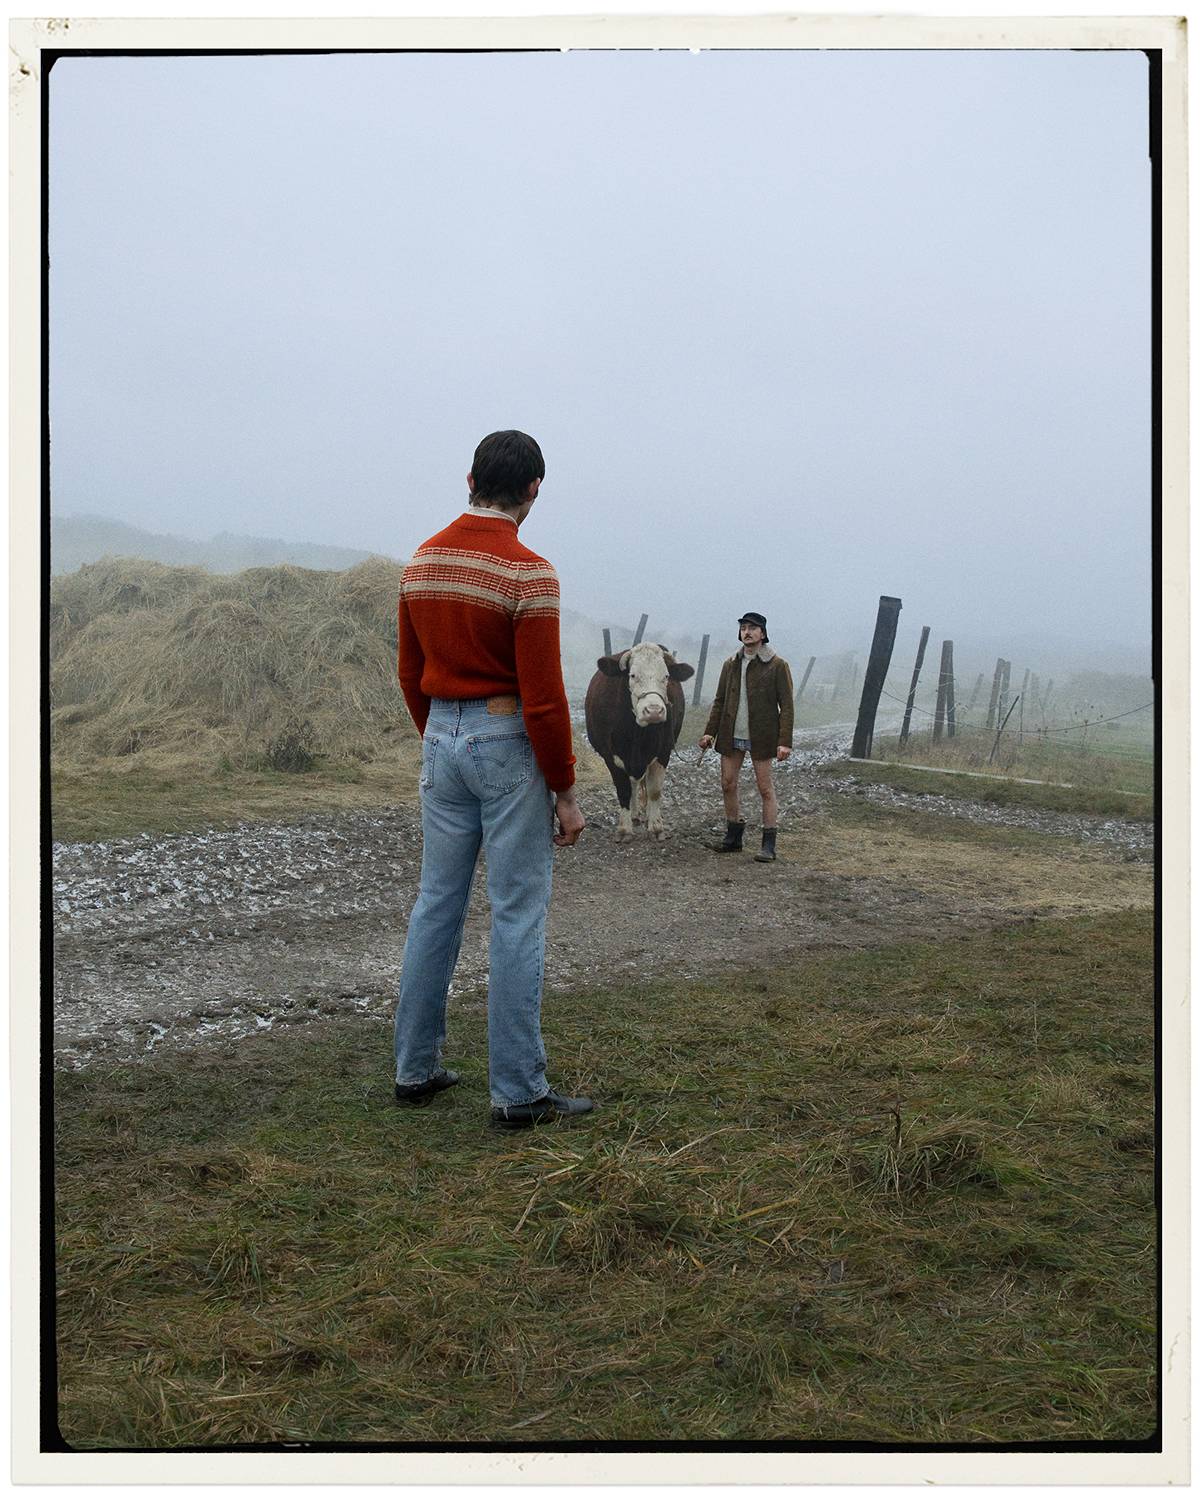 A person wearing Levi's jeans in a grassy area looking at a cow walking towards him with a man.